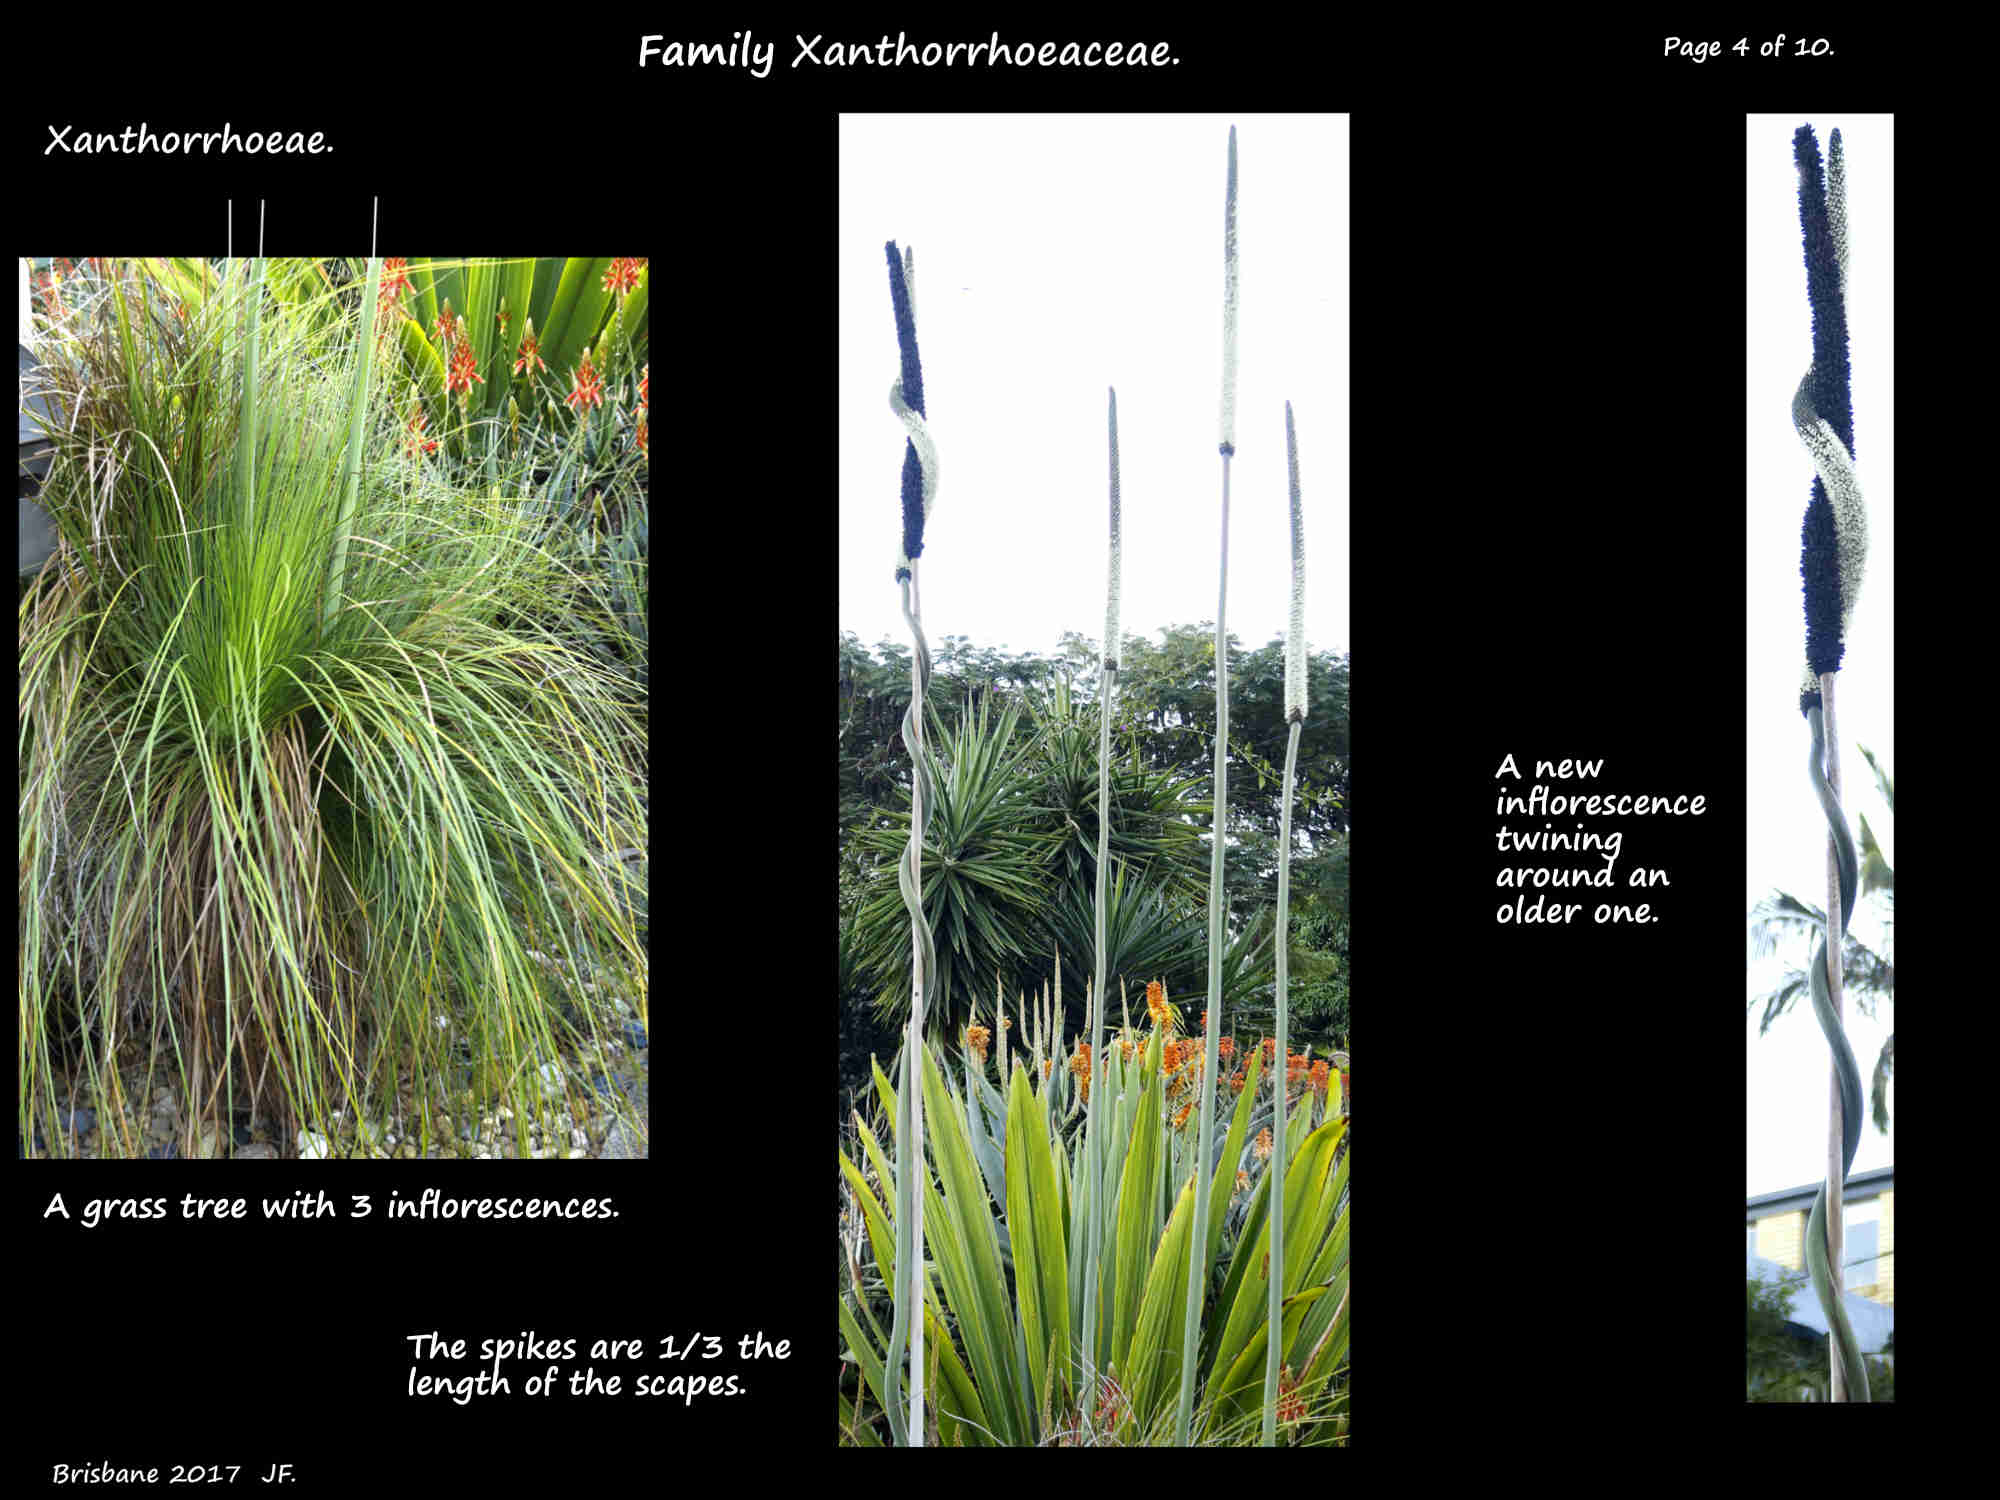 4 A twining grass tree inflorescence